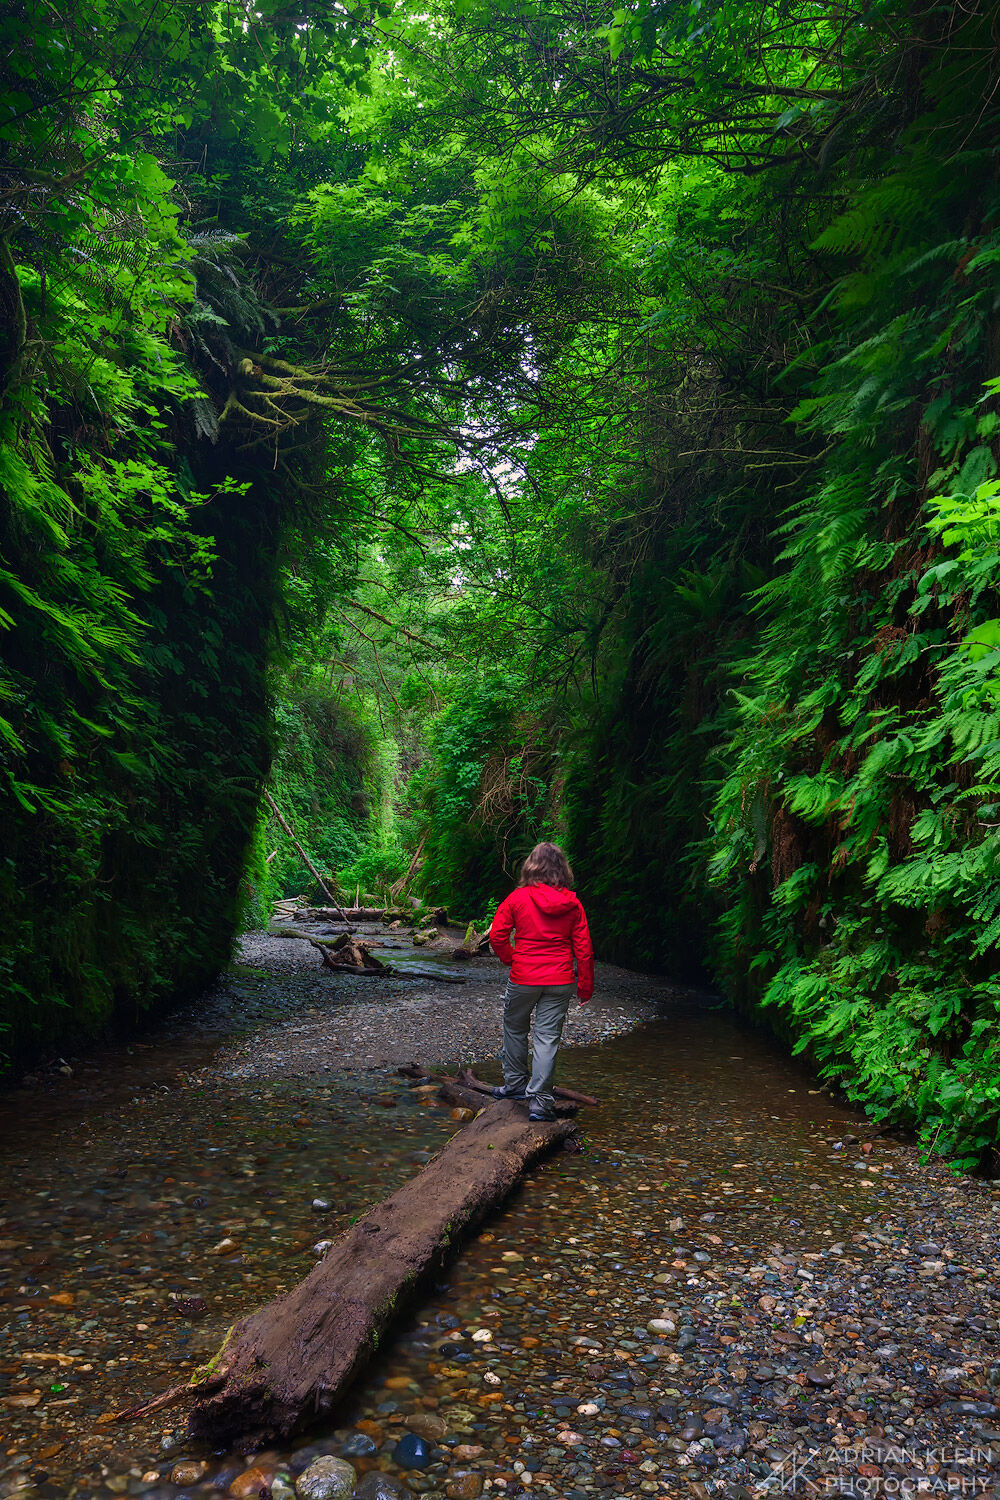 My wife starring into the magnificent Fern Canyon at Gold Bluffs Beach located in Northern California in the Redwoods.